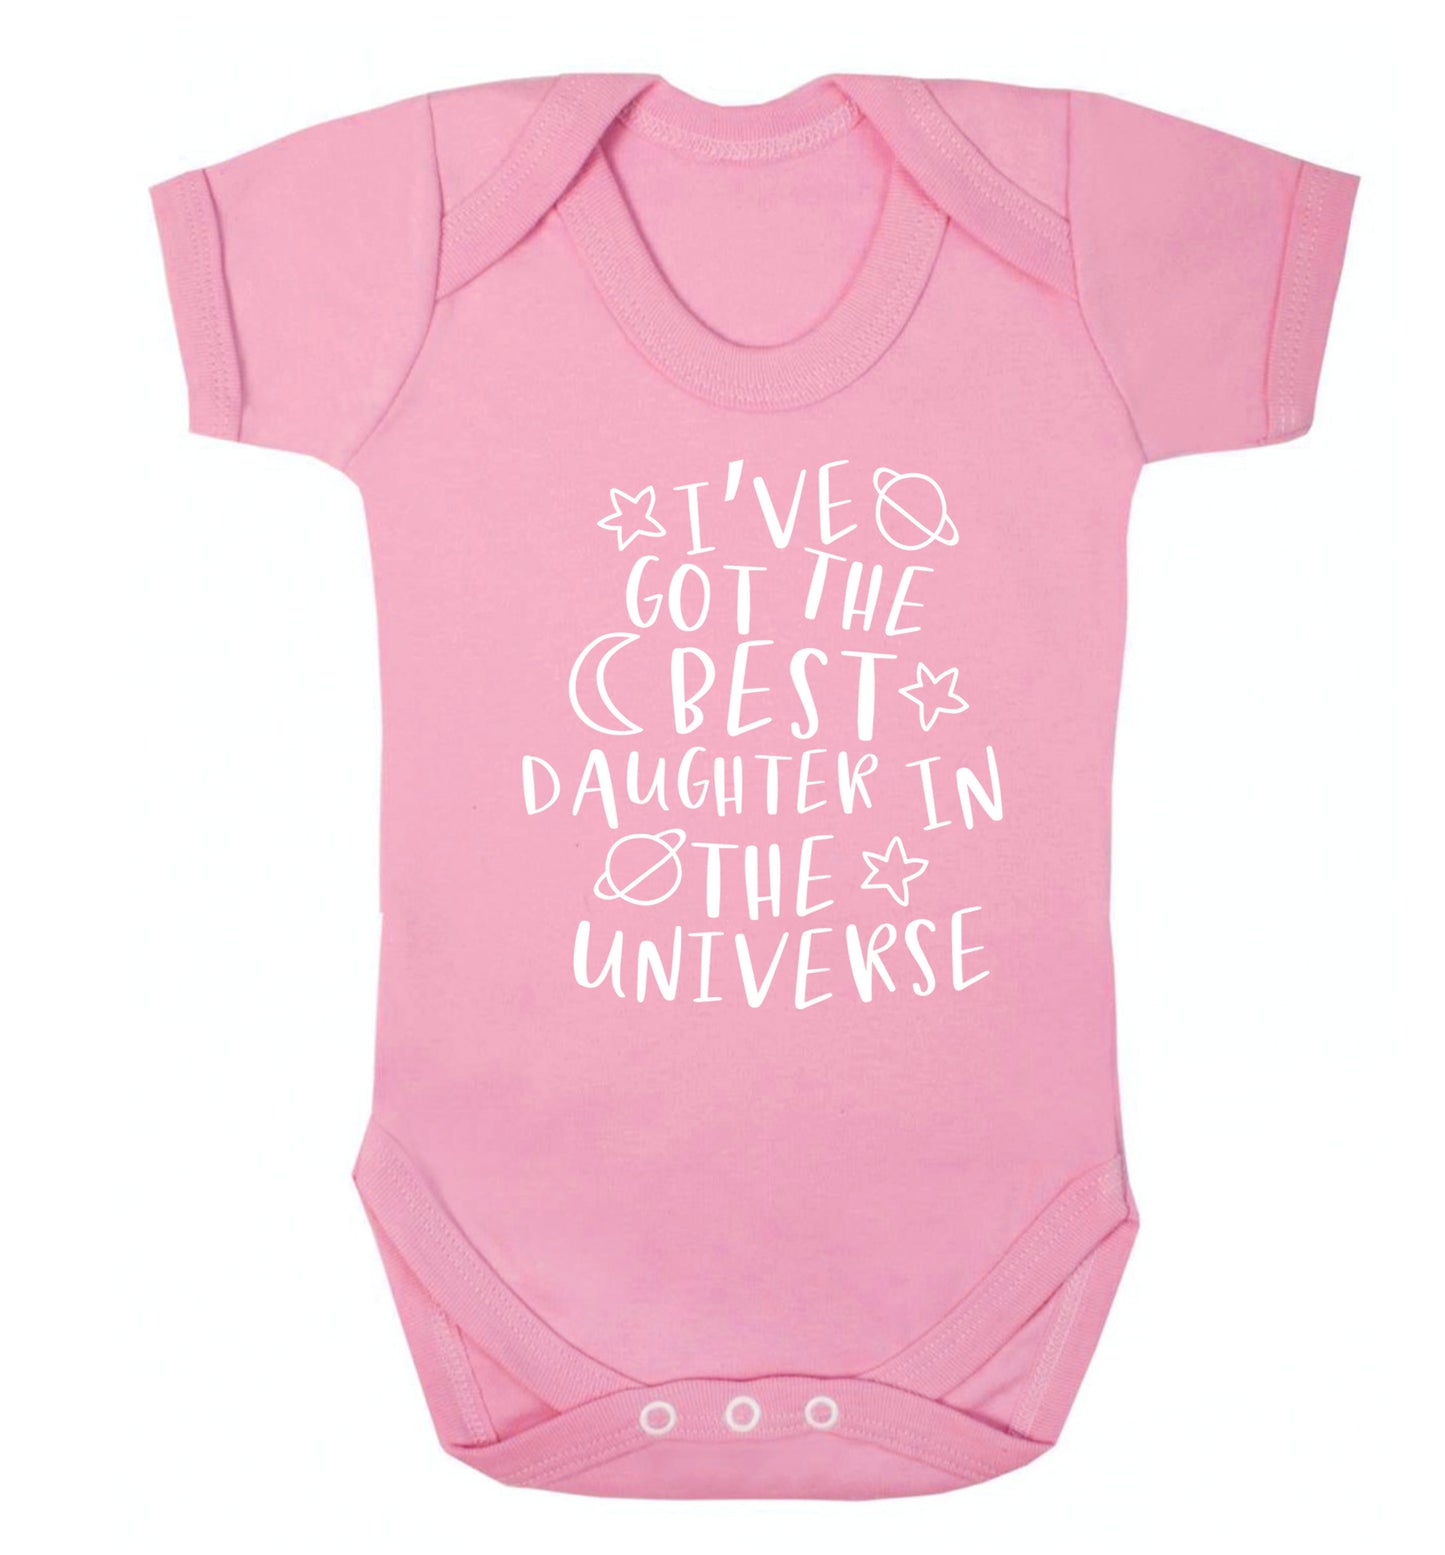 I've got the best daughter in the universe Baby Vest pale pink 18-24 months